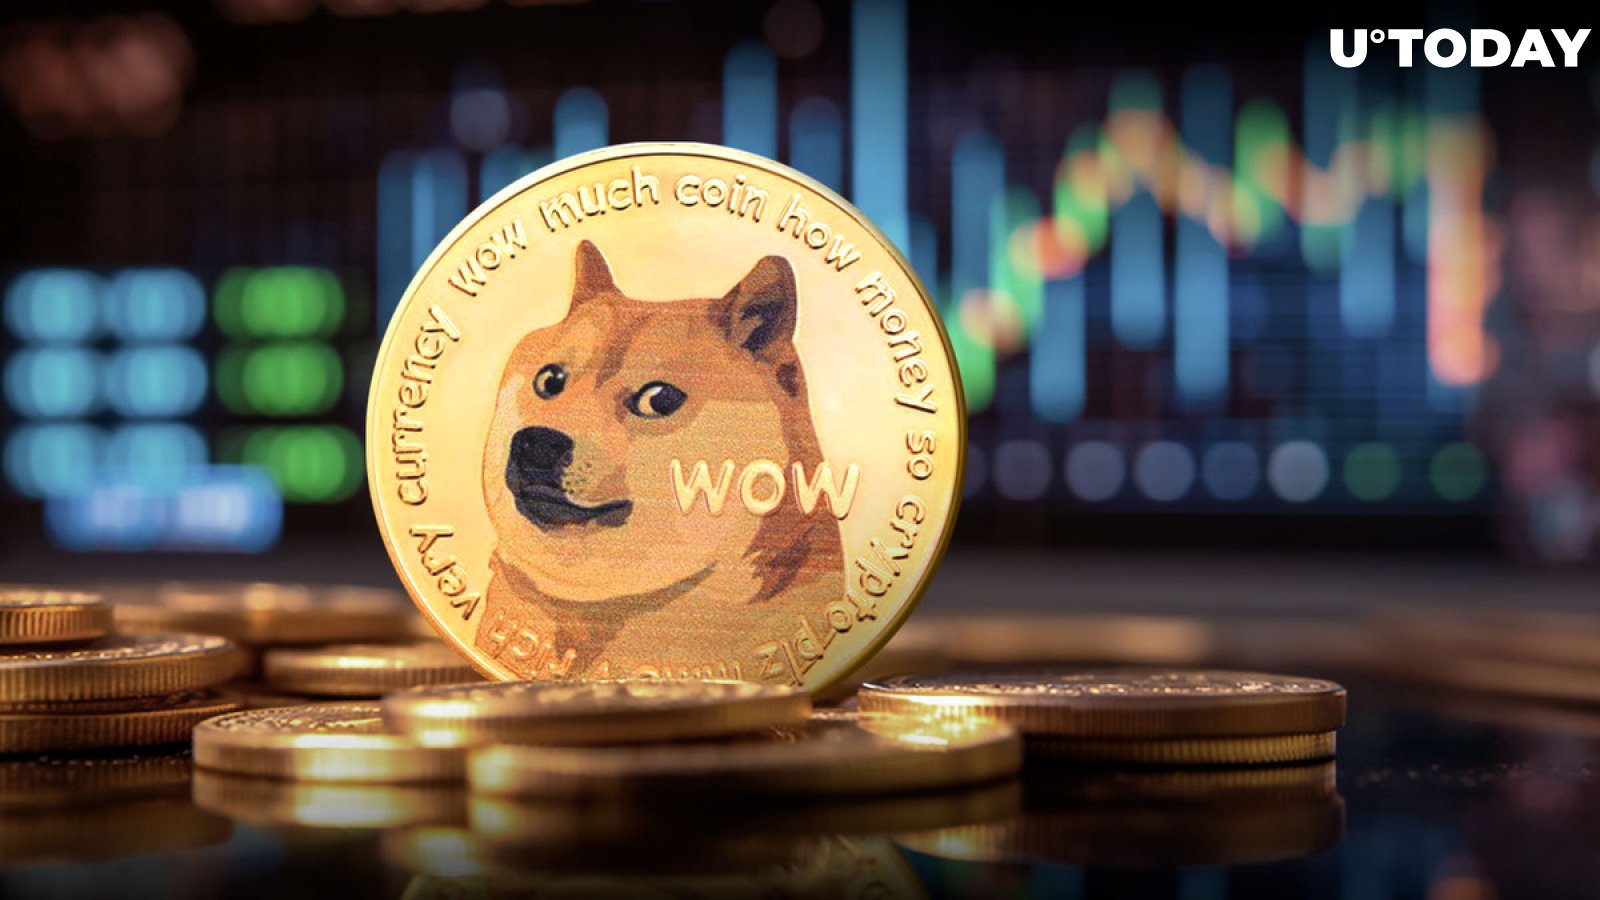 Dogecoin to $1: Analyst Predicts Classic DOGE Pattern Breakout